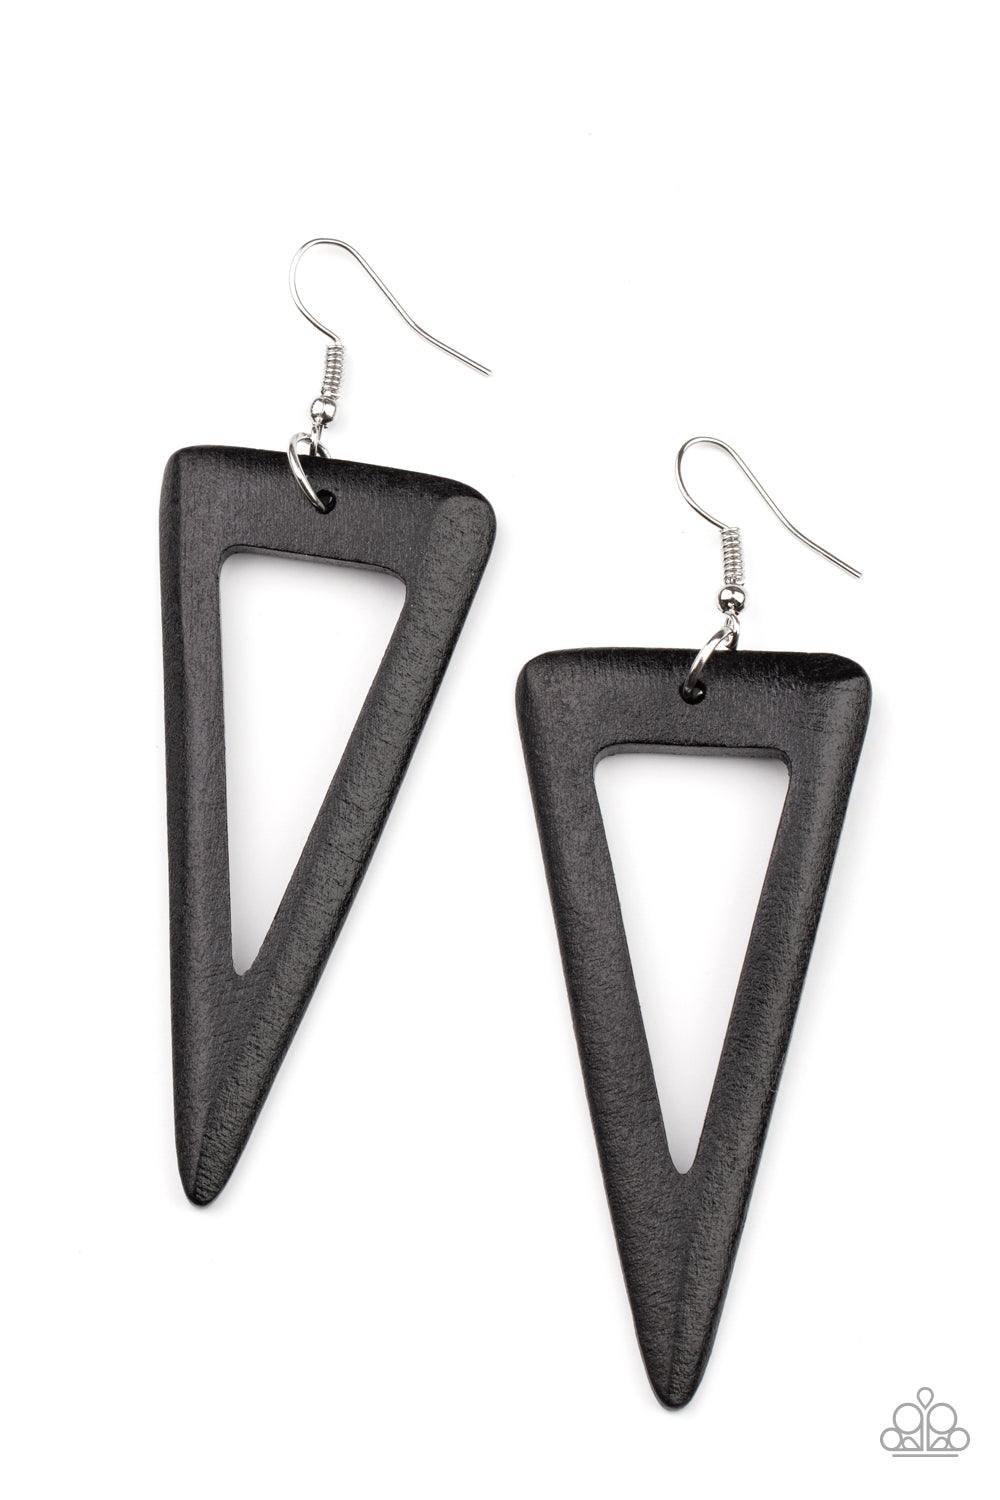 Paparazzi Accessories Bermuda Backpacker - Black Painted in a shiny black finish, a sharp triangular wooden frame swings from the ear for a fiercely earthy look. Earring attaches to a standard fishhook fitting. Sold as one pair of earrings. Jewelry